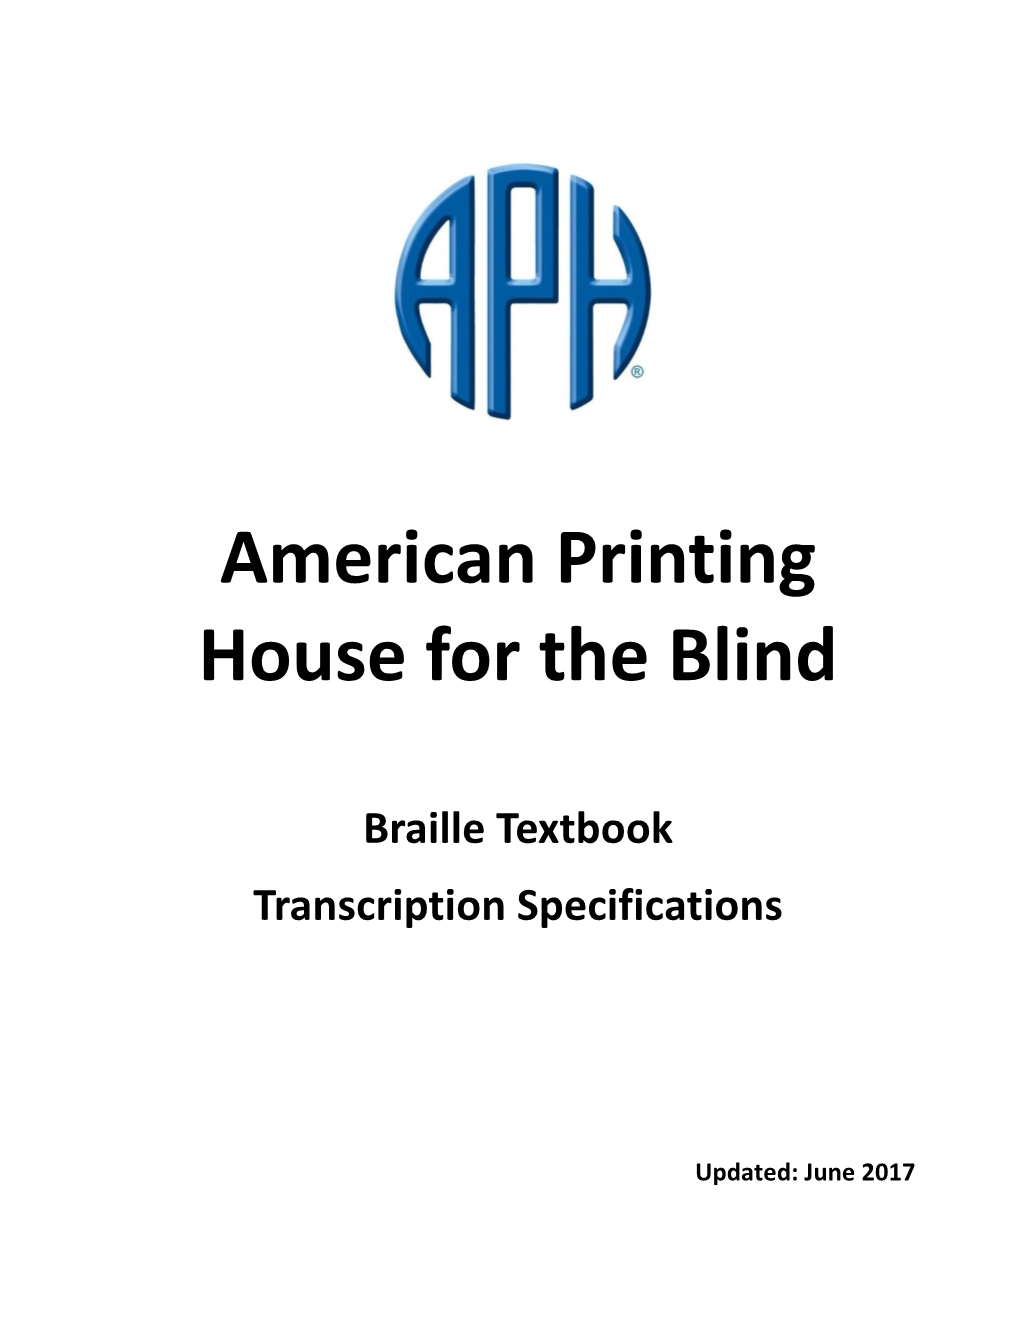 Braille Textbook Transcription Specifications